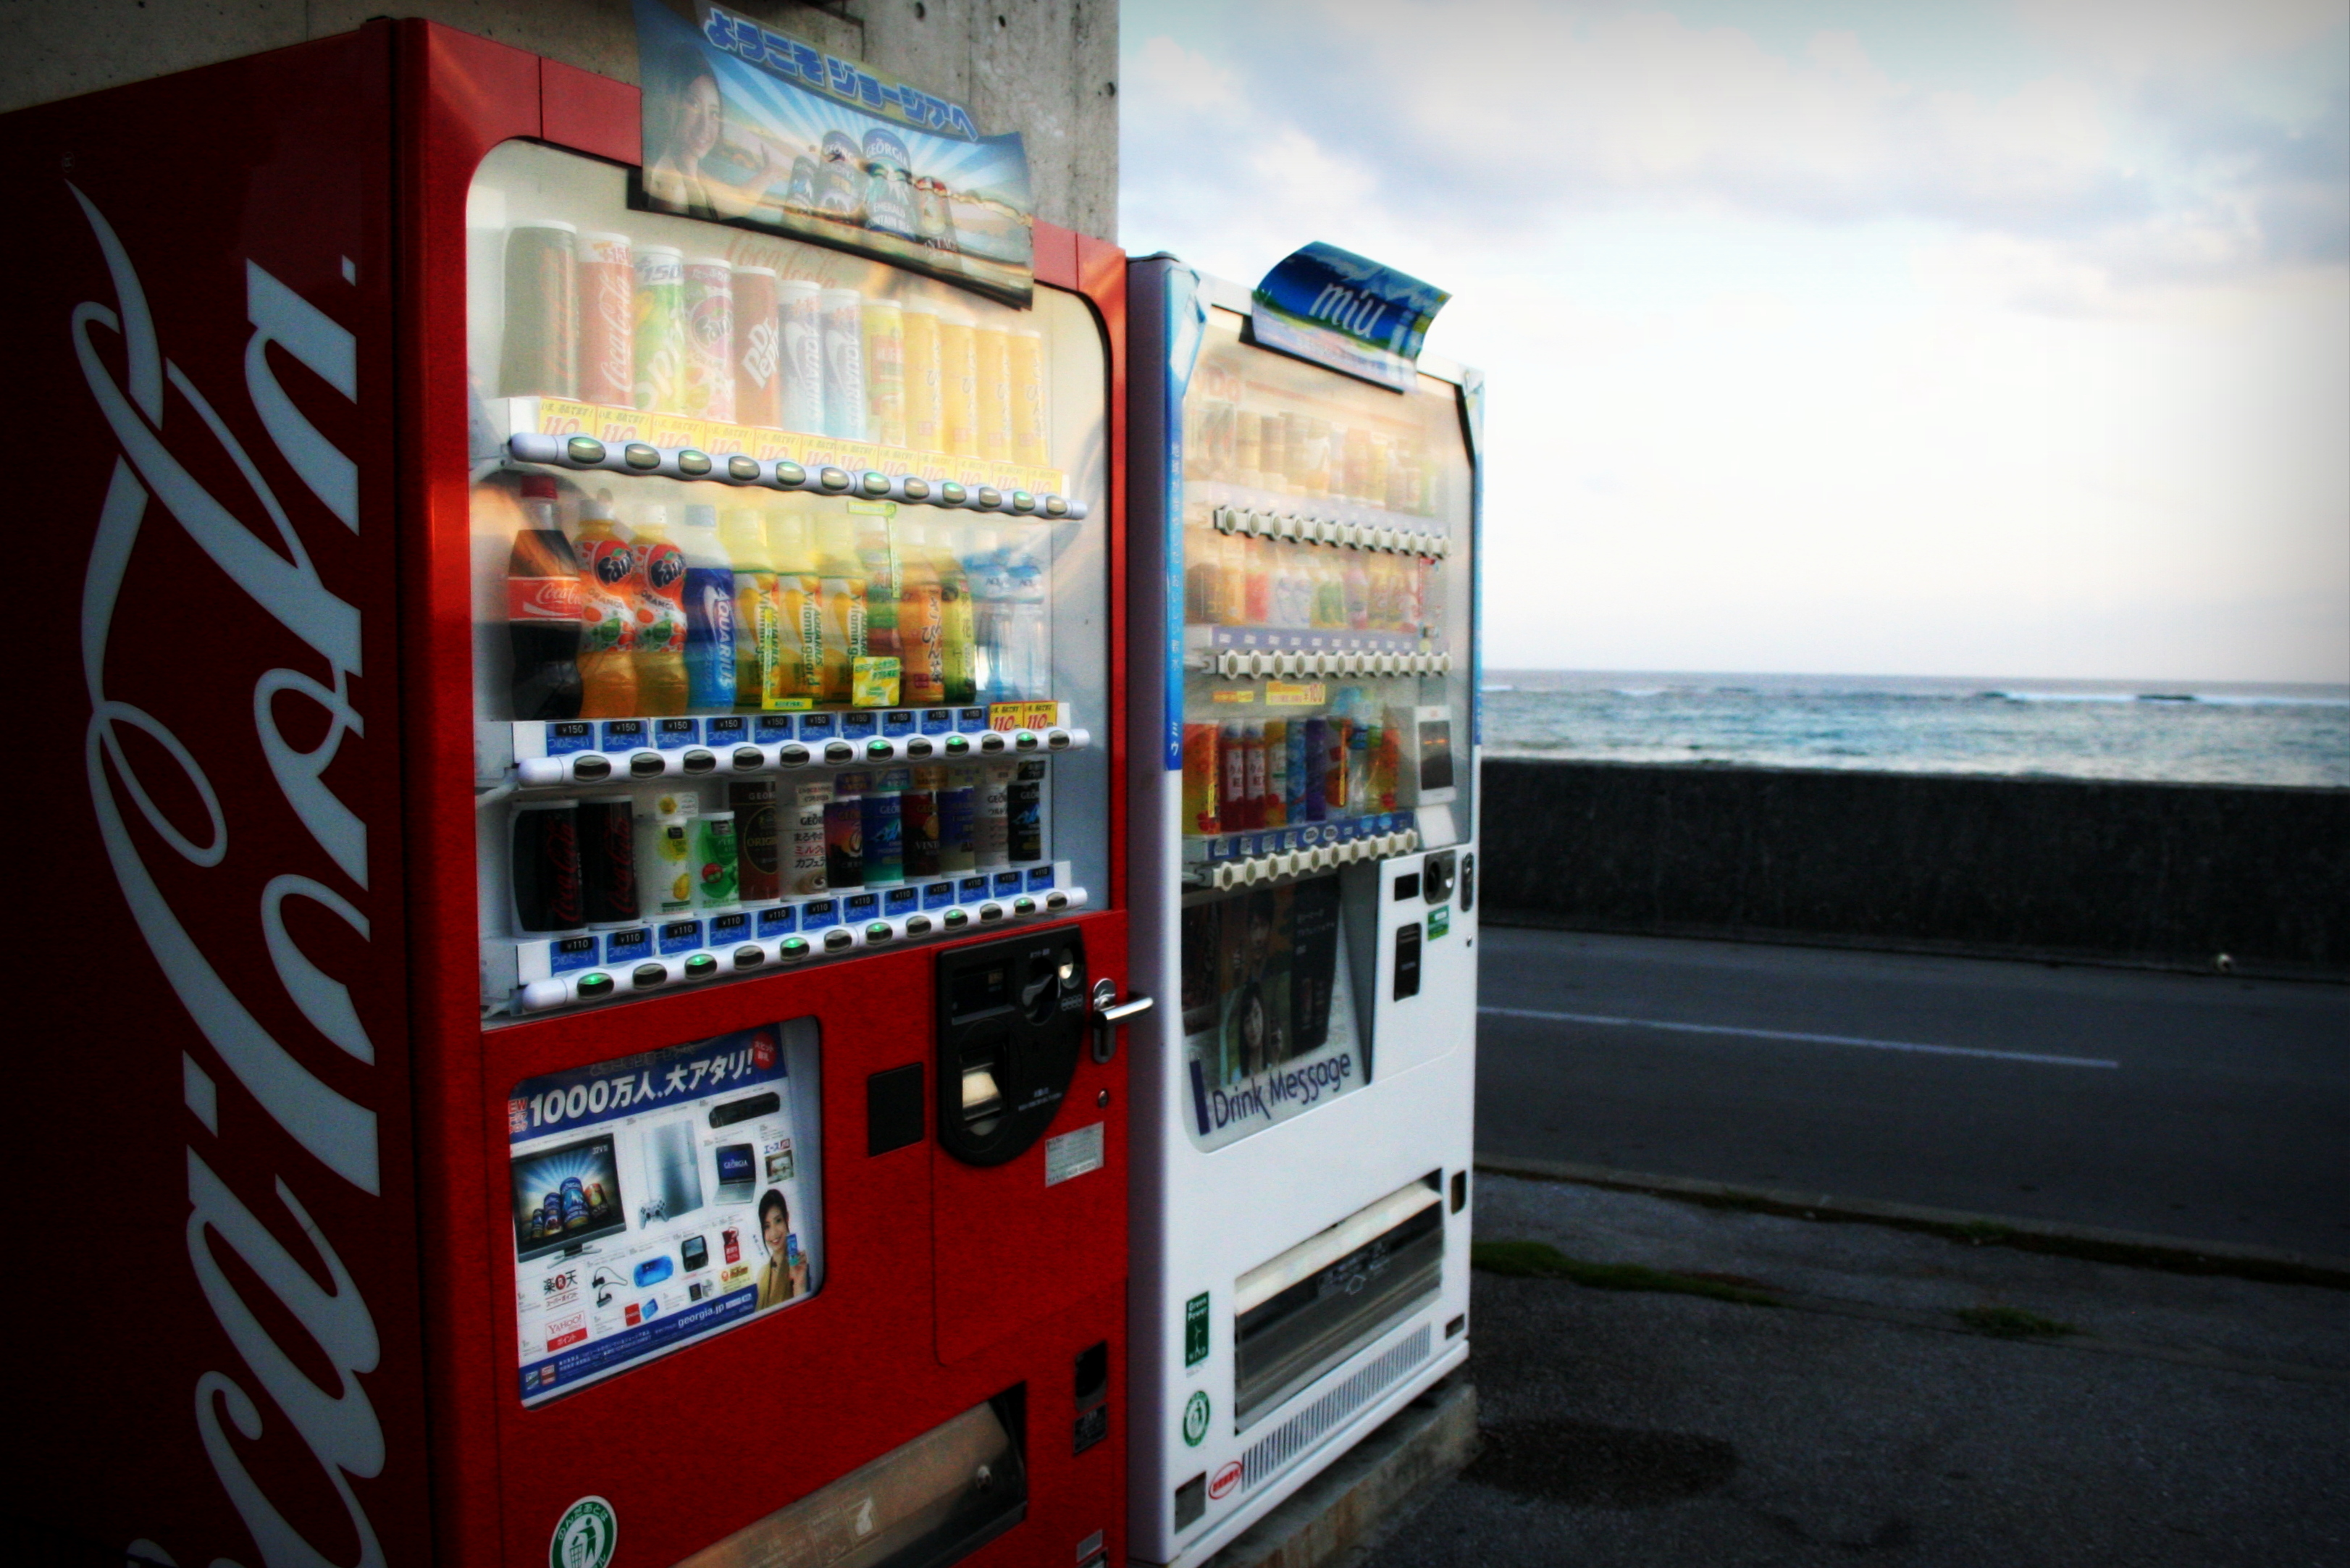 Soda vending machines by the shore in Japan